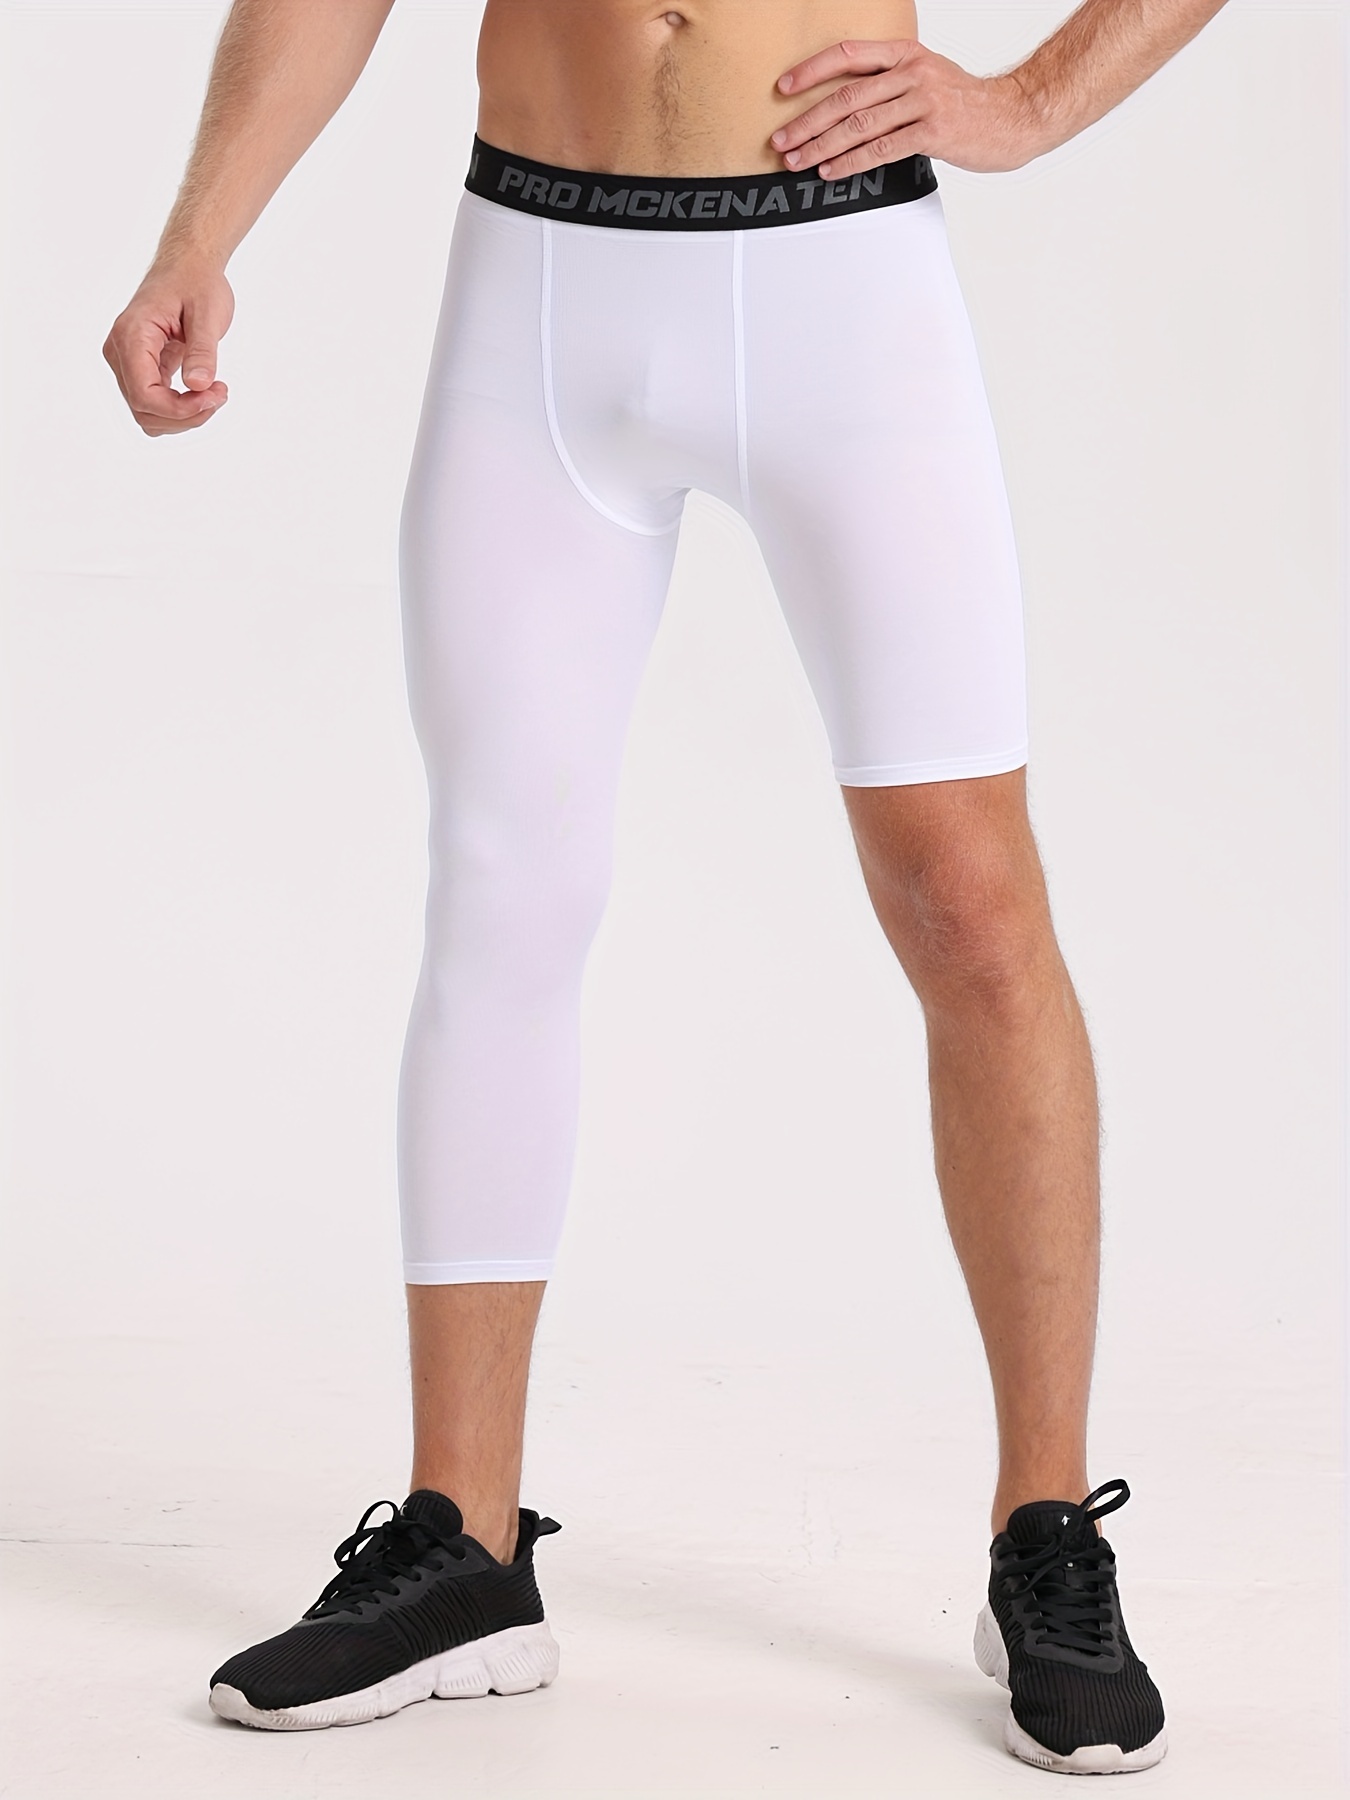 One Leg Compression Tights (White) - For Basketball, Football